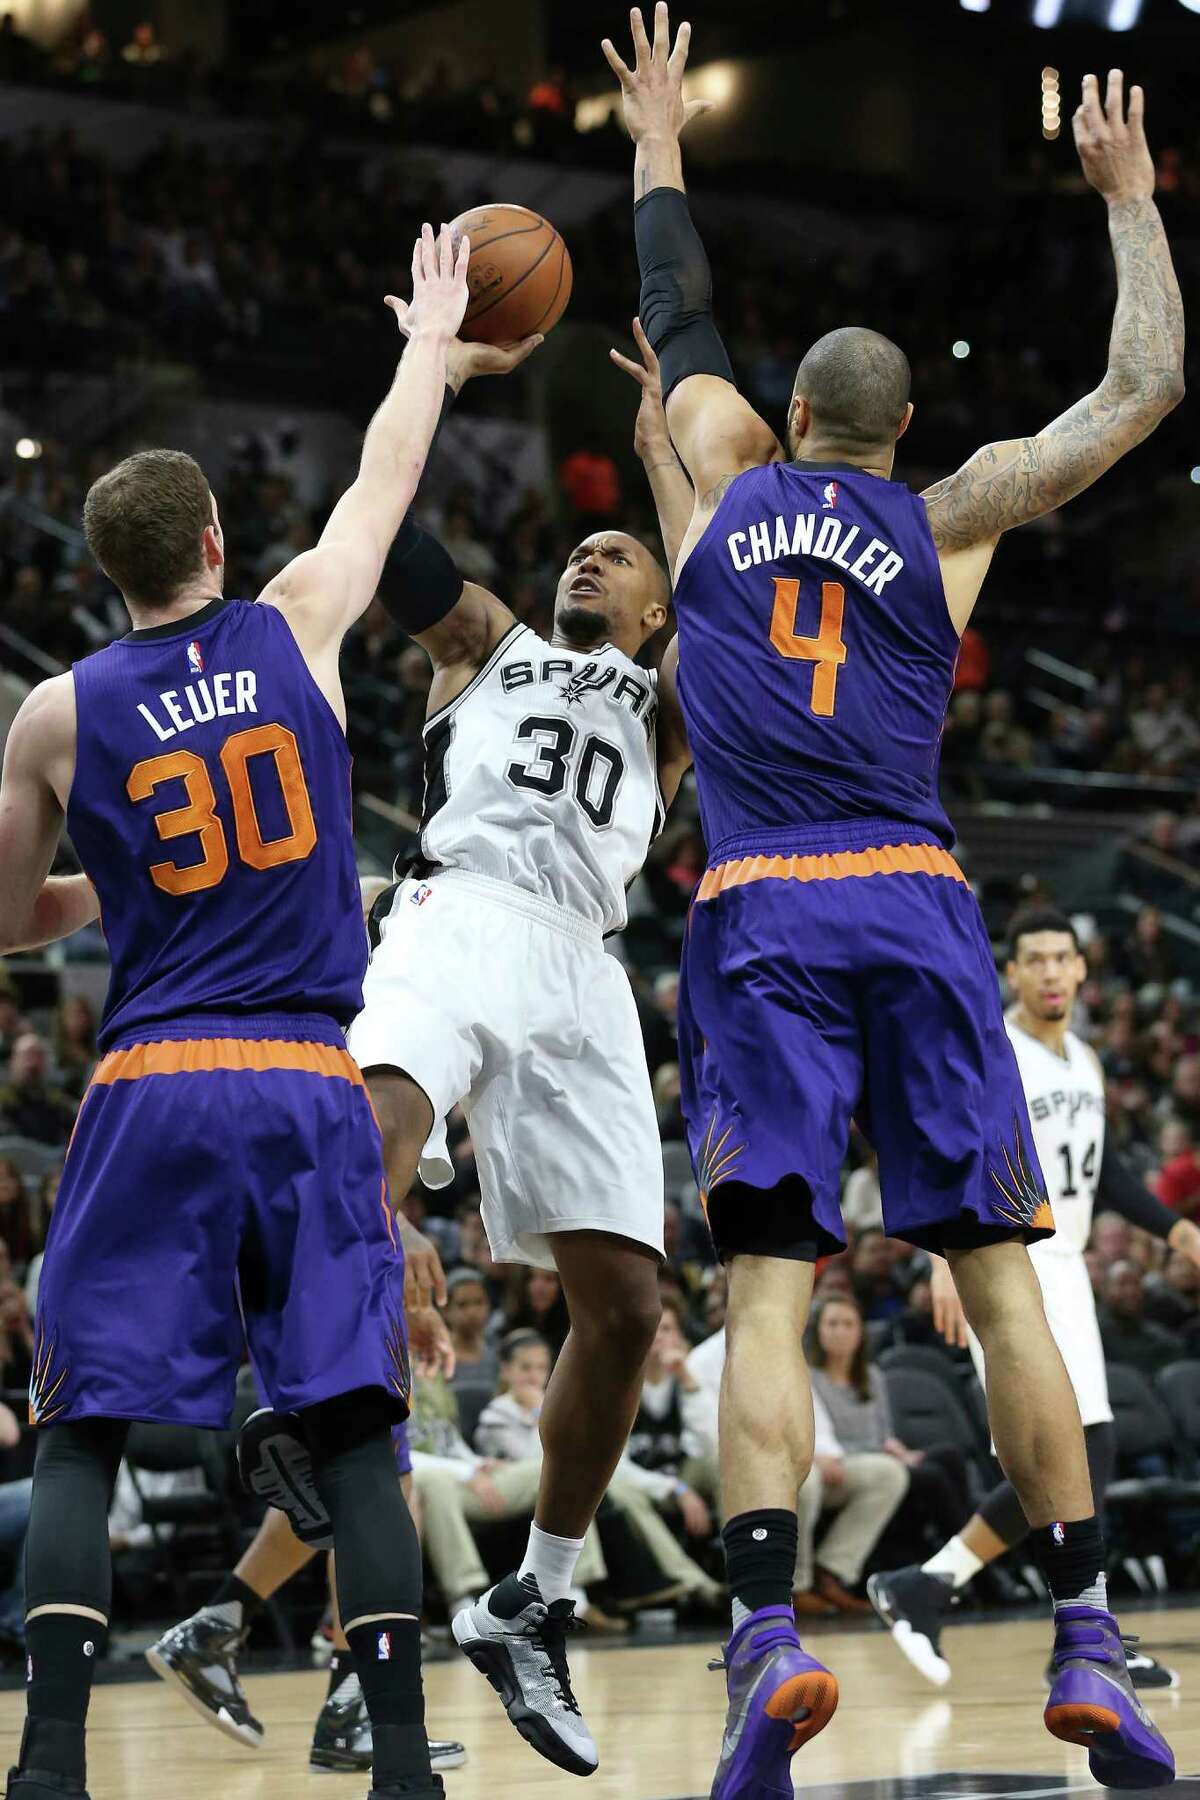 David West fades back for a shot against Jon Leuer and Tyson Chandler as the Spurs host the Suns at the AT&T Center on Dec. 30, 2015.